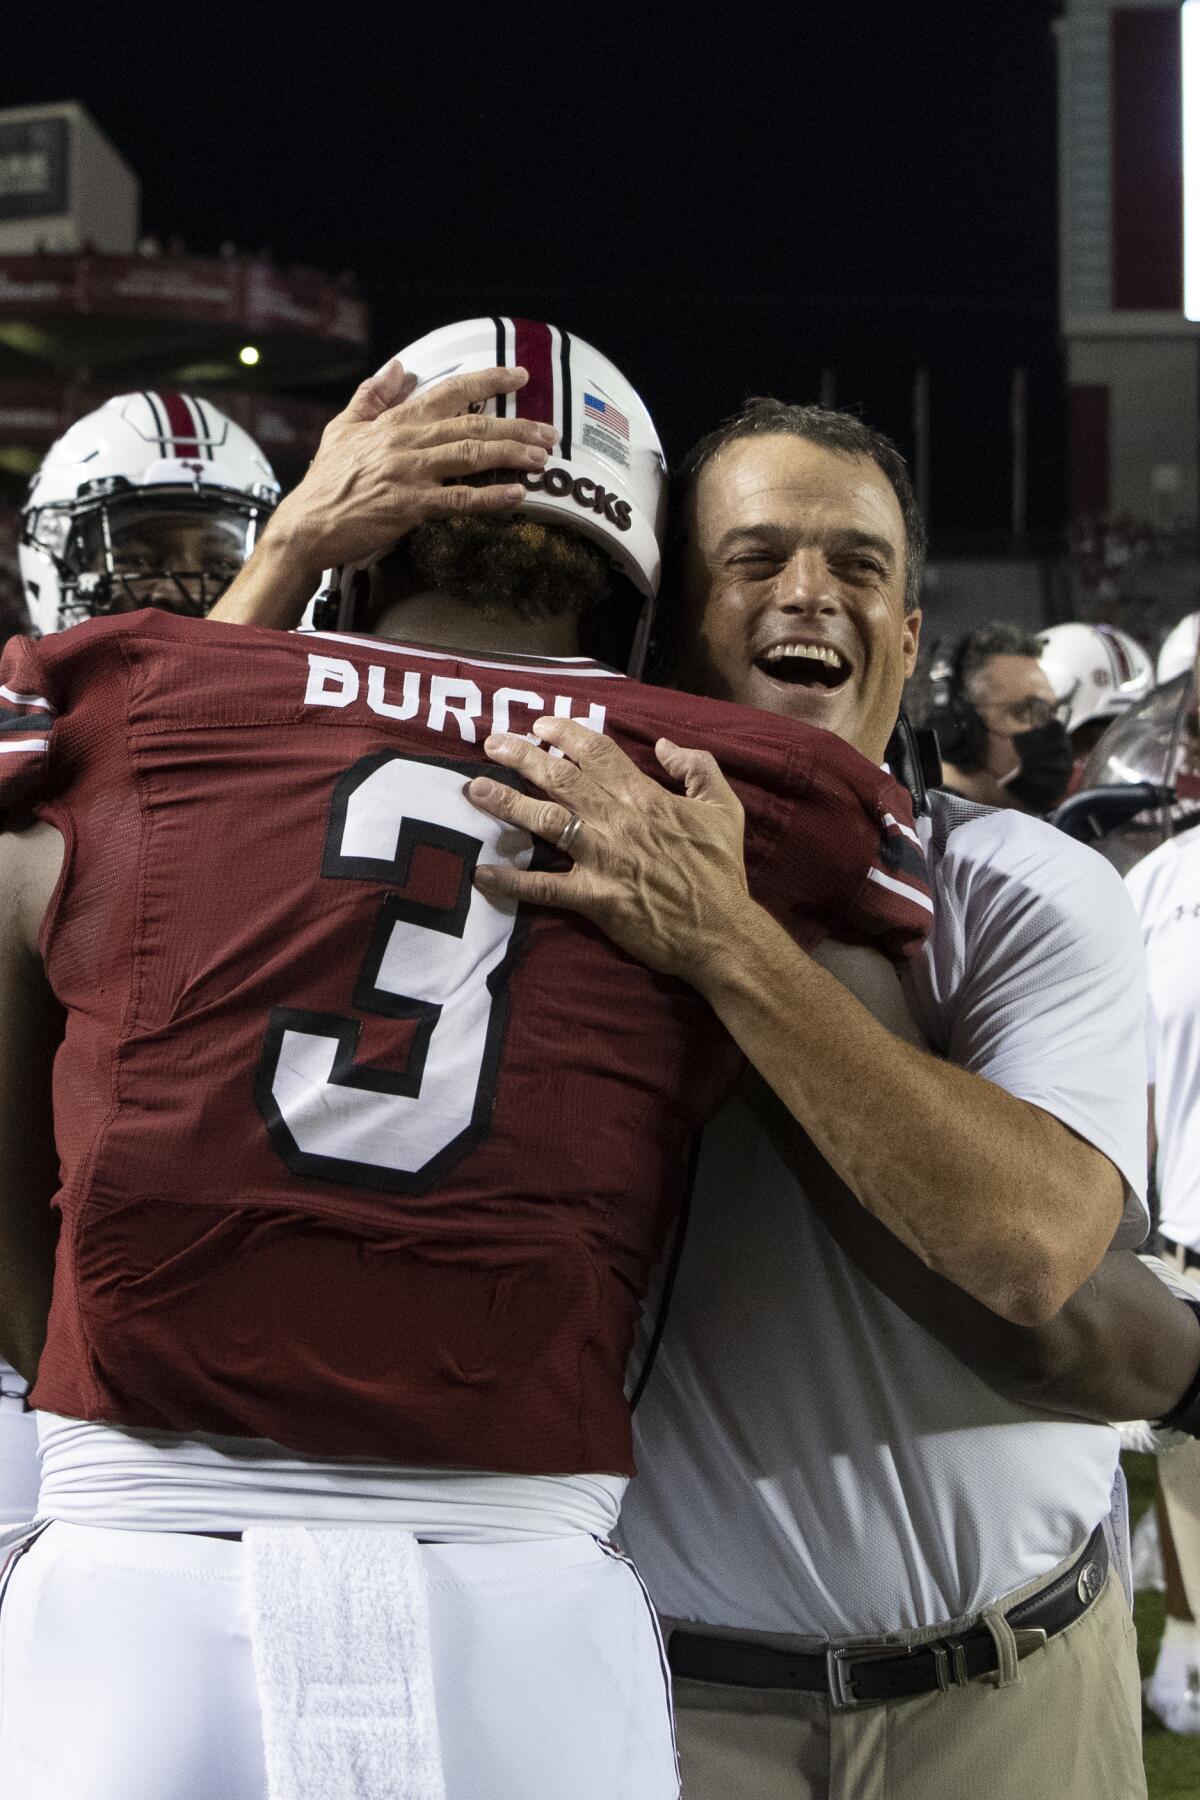 South Carolina defensive end Jordan Burch (3) celebrates with head coach Shane Beamer after his pick six during the second half of an NCAA college football game against Eastern Illinois, Saturday, Sept. 4, 2021, in Columbia, S.C. (AP Photo/Hakim Wright Sr.)